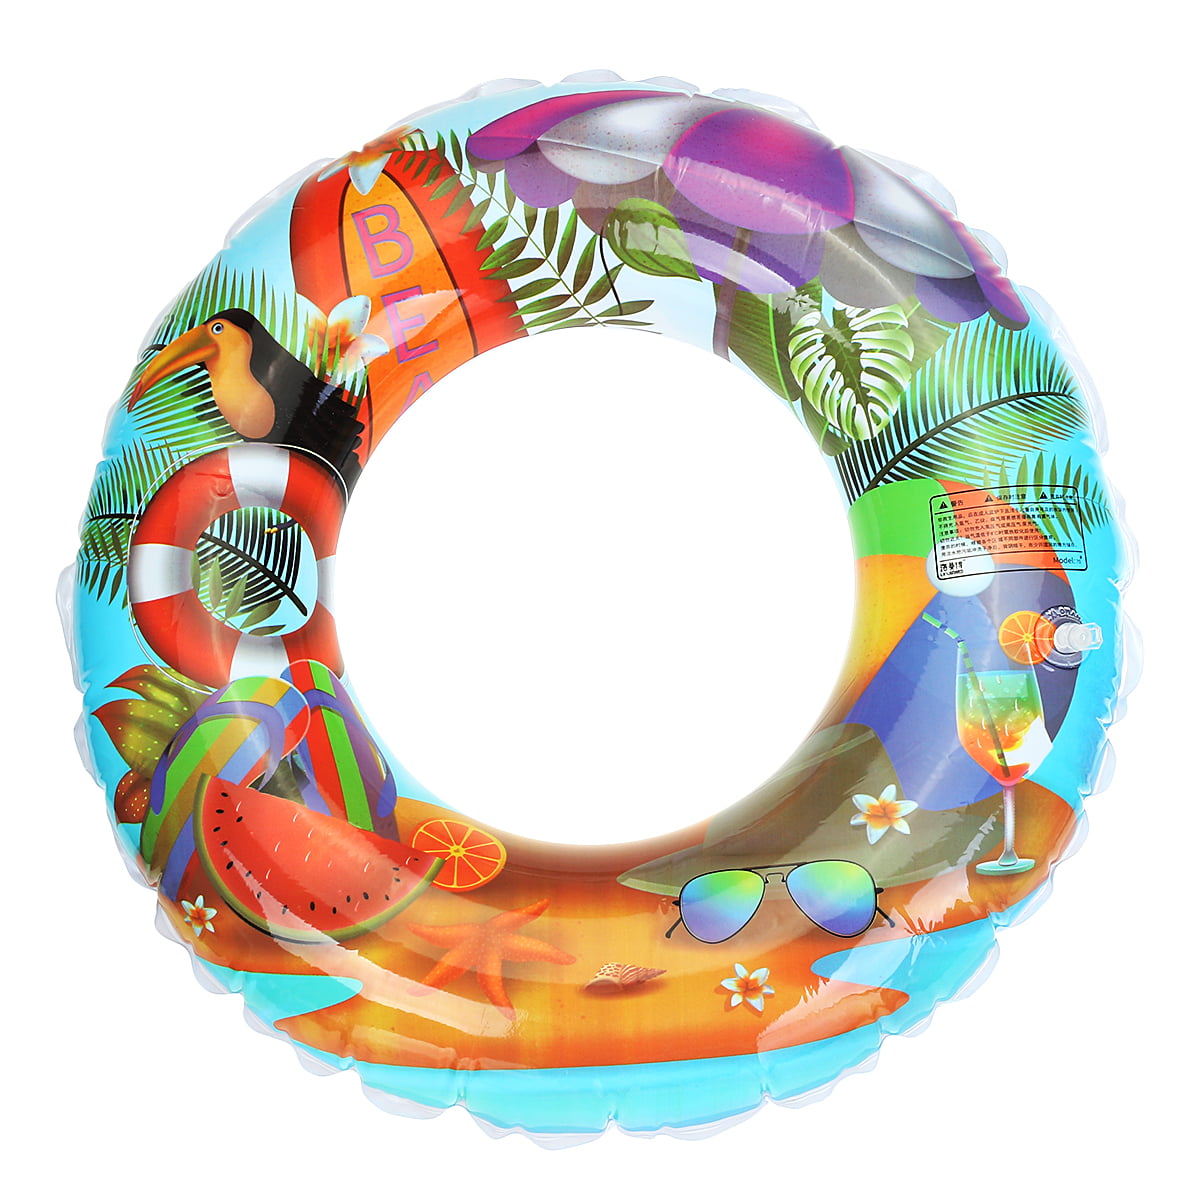 Details about   Bright Orange Round Splash Ring Toy For Party Swimming Pool 